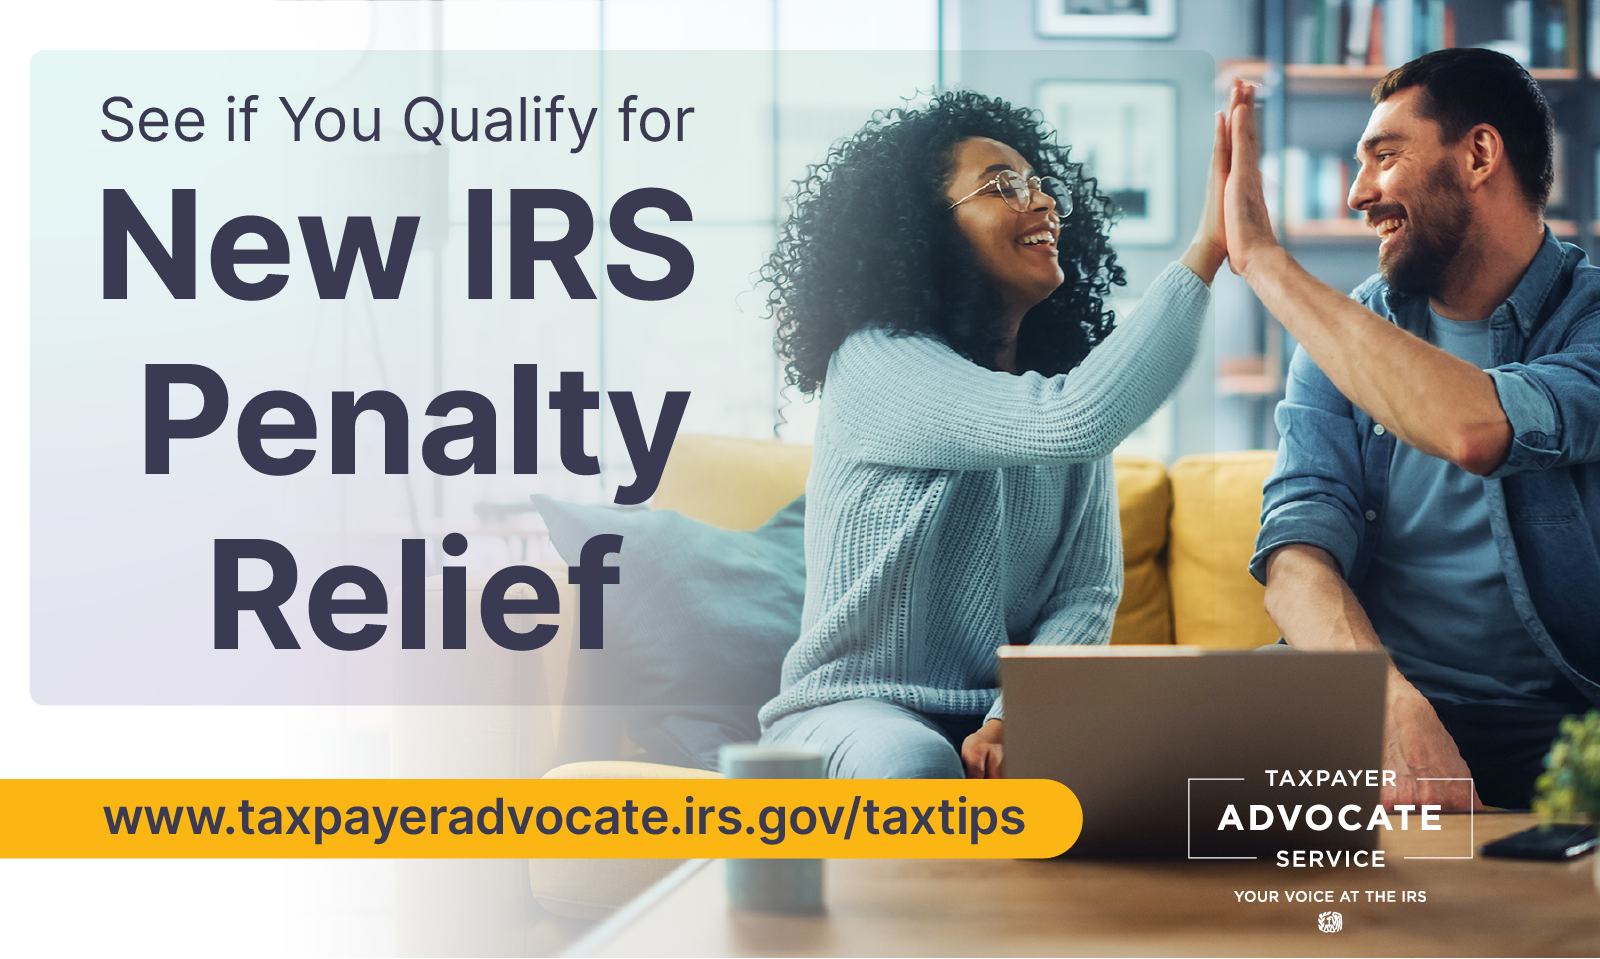 Woman and man doing high five; See if you qualify for new IRS penalty relief; www.taxpayeradvocate.irs.gov/taxtips; Taxpayer Advocate Service logo